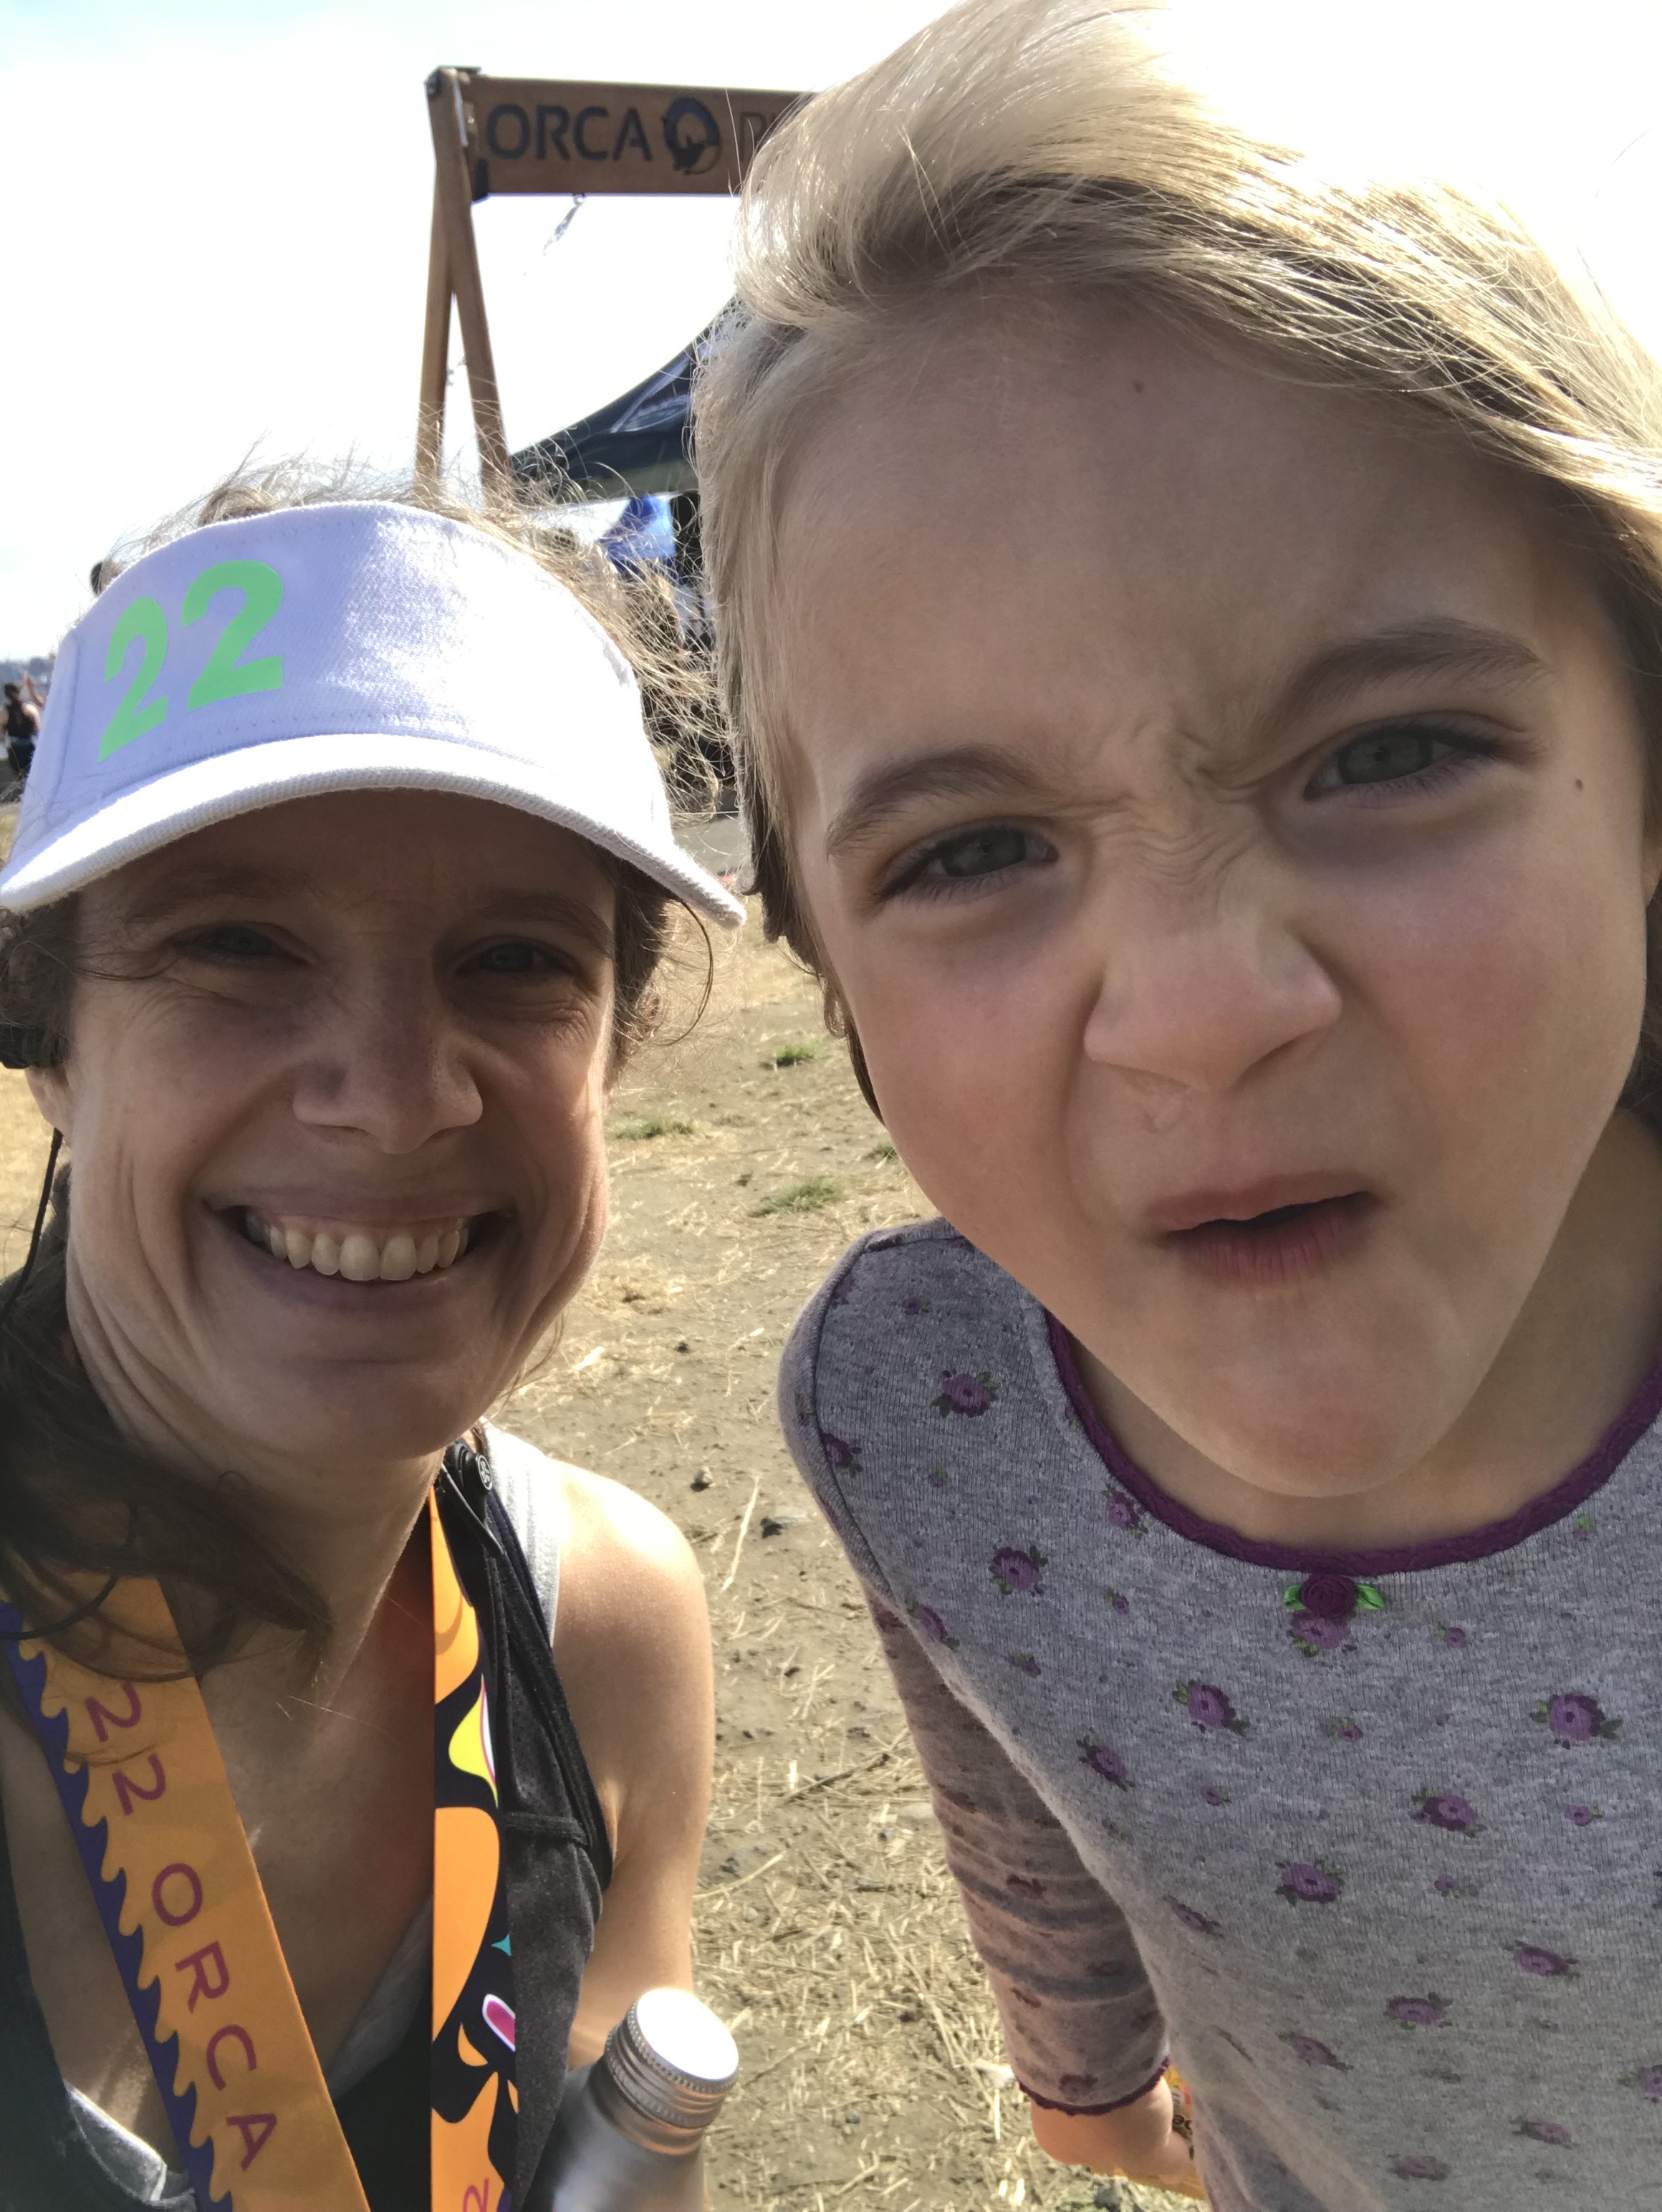 Finisher photo with my little one